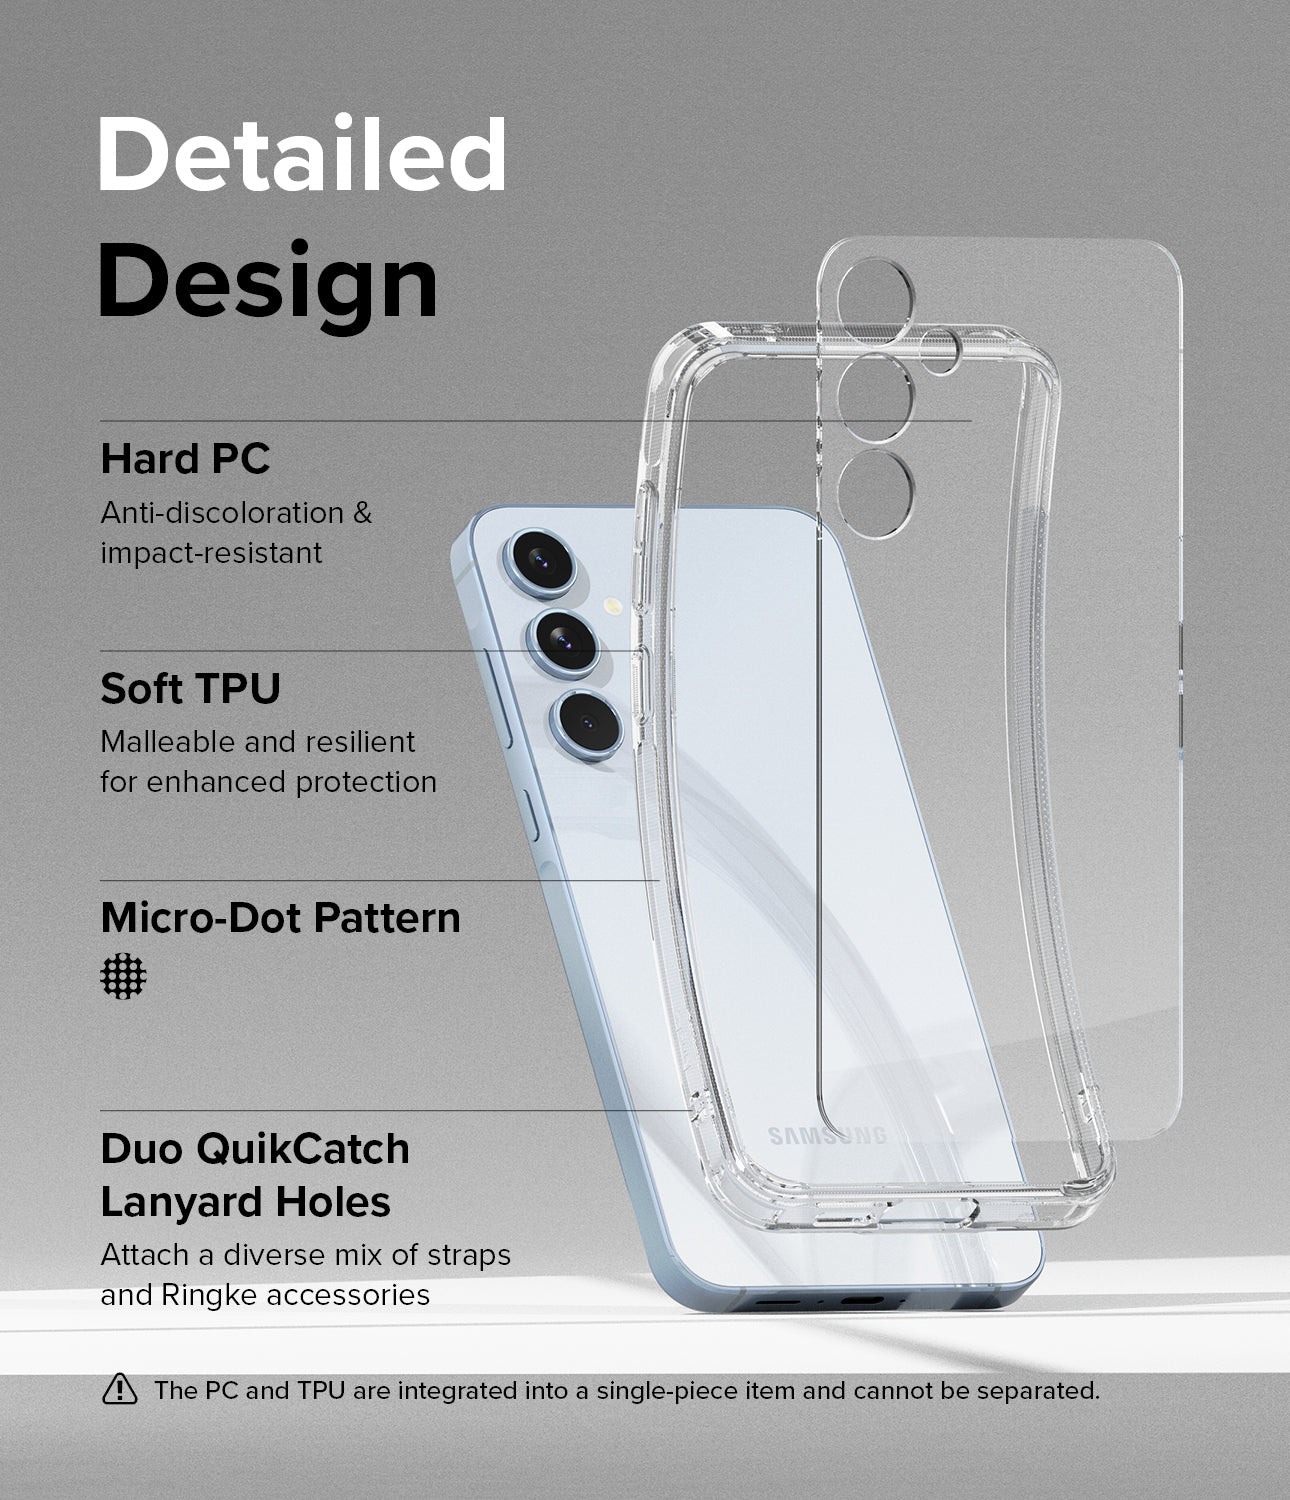 Galaxy A55 Case | Fusion - Detailed Design. Anti-discoloration and impact resistant with Hard PC. Malleable and resilient for enhanced protection with Soft TPU. Micro-Dot Pattern. Duo QuikCatch Lanyard Holes to attach a diverse mix of straps and Ringke accessories.